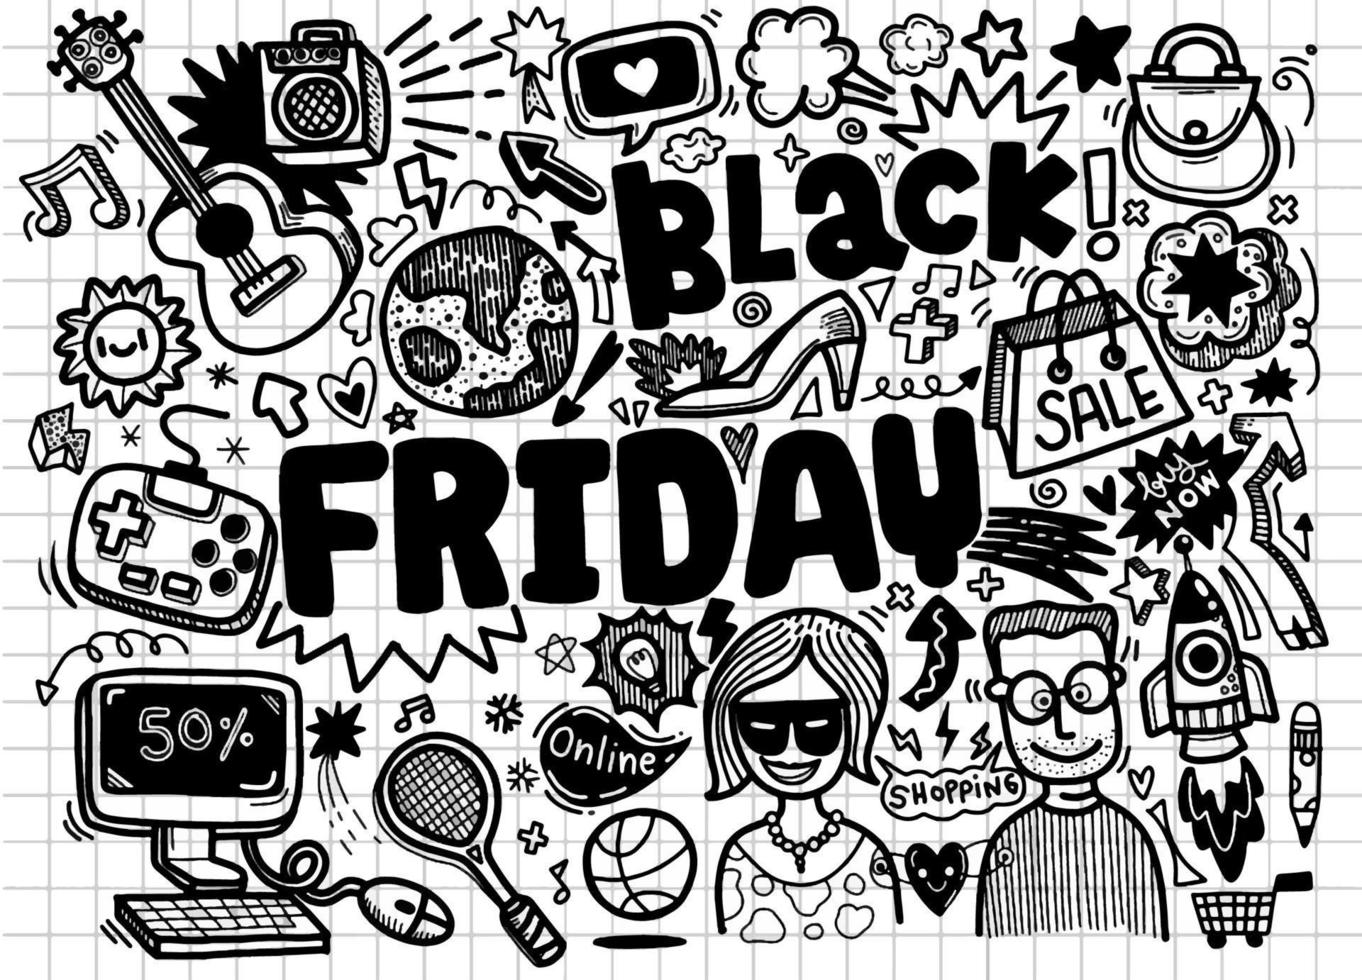 Black Friday sale hand lettering and doodles elements background vector